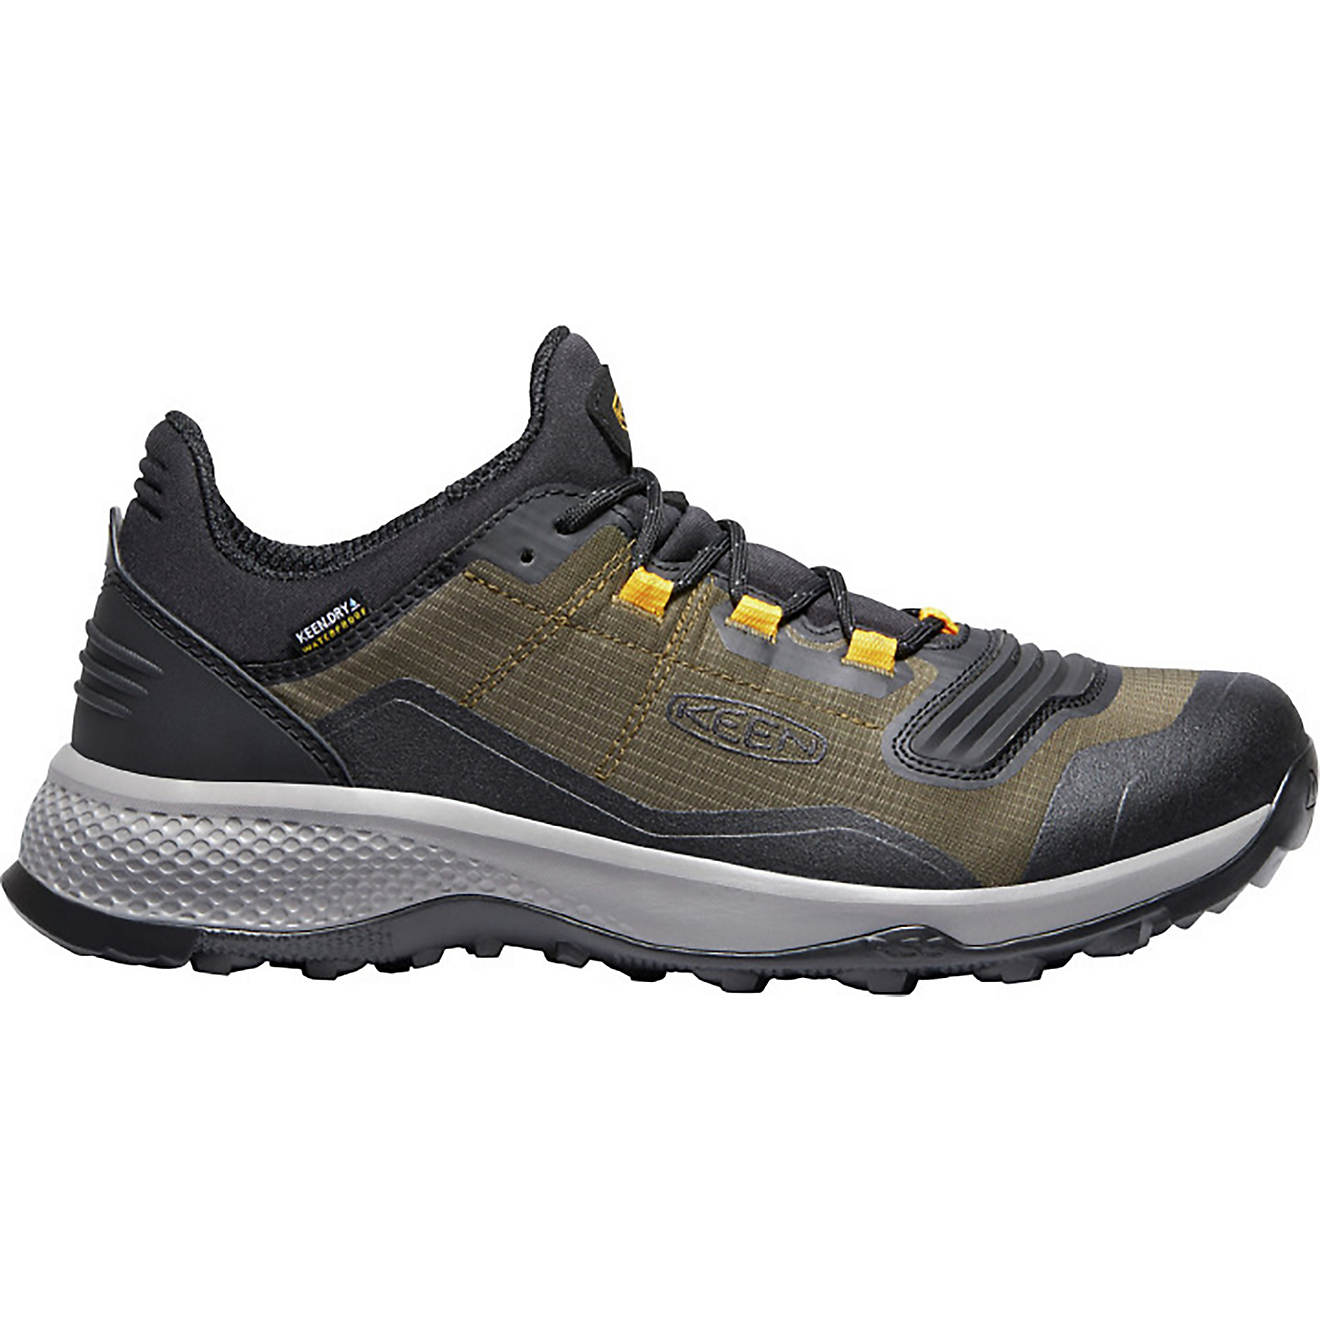 KEEN Men's Tempo Flex Hiking Shoes | Free Shipping at Academy